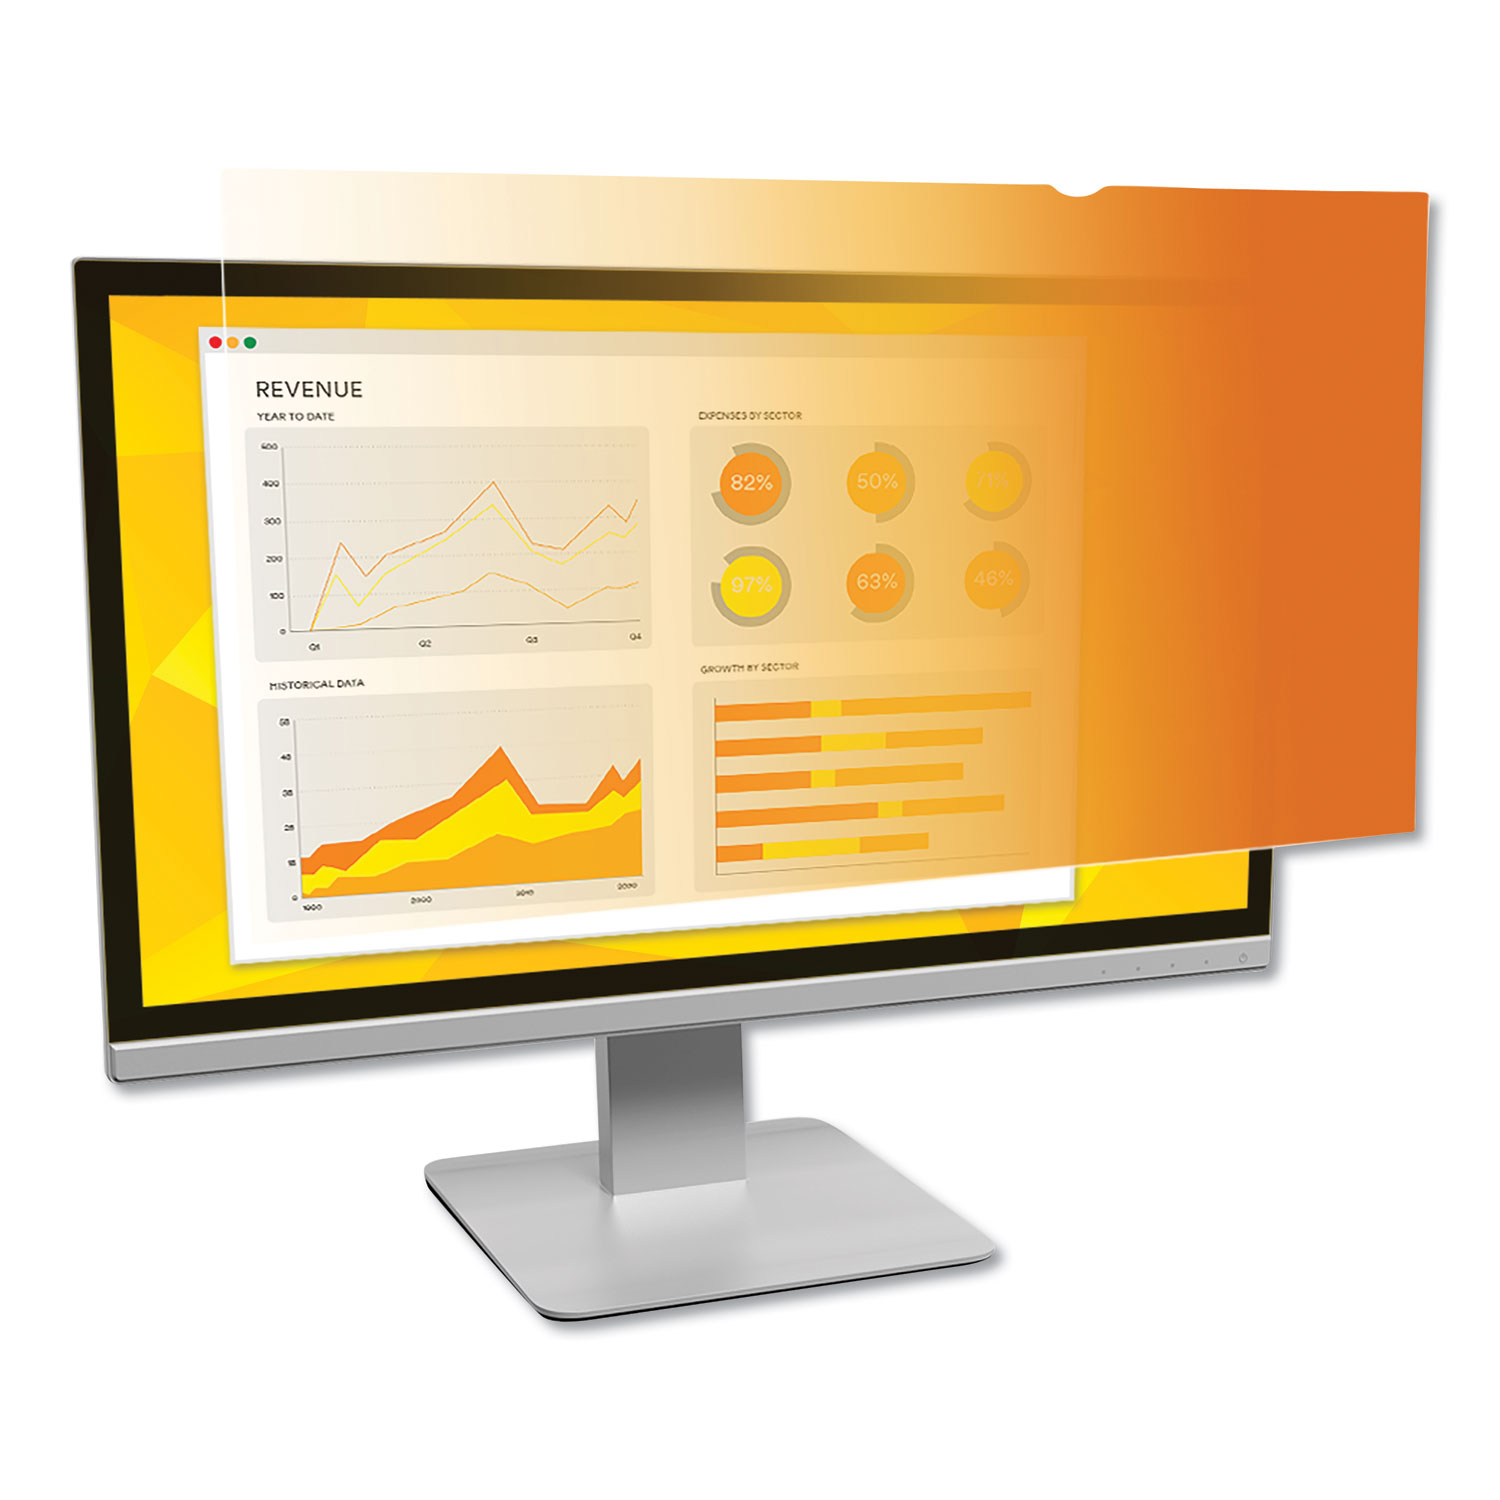 Gold Frameless Privacy Filter for 19" Widescreen Monitor, 16:10 Aspect Ratio